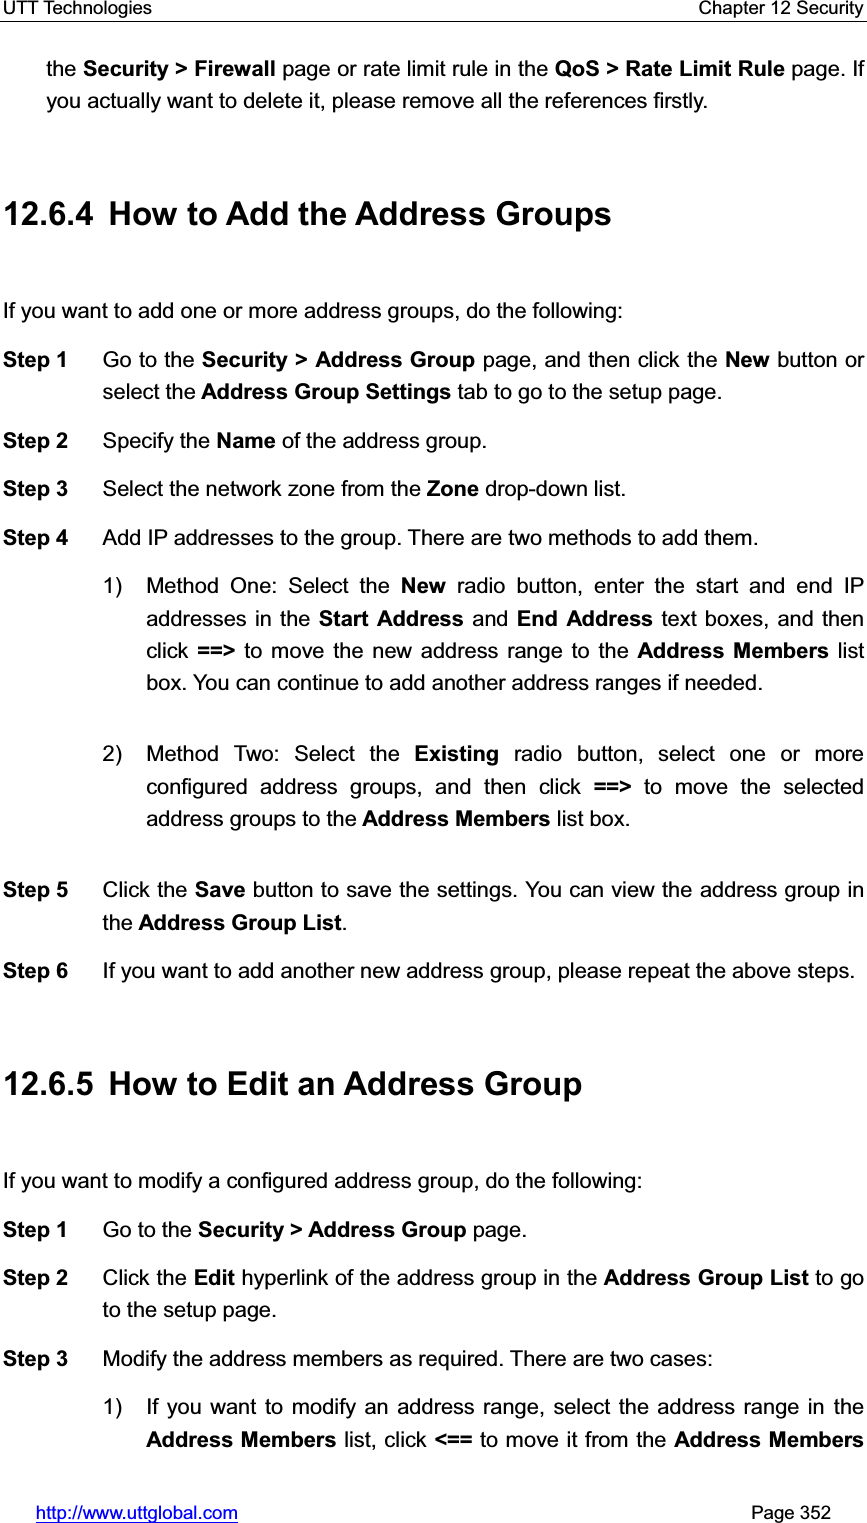 UTT Technologies    Chapter 12 Security   http://www.uttglobal.com                                                       Page 352 the Security &gt; Firewall page or rate limit rule in the QoS &gt; Rate Limit Rule page. If you actually want to delete it, please remove all the references firstly. 12.6.4  How to Add the Address Groups If you want to add one or more address groups, do the following:   Step 1  Go to the Security &gt; Address Group page, and then click the New button or select the Address Group Settings tab to go to the setup page. Step 2  Specify the Name of the address group. Step 3  Select the network zone from the Zone drop-down list. Step 4  Add IP addresses to the group. There are two methods to add them. 1) Method One: Select the New radio button, enter the start and end IP addresses in the Start Address and End Address text boxes, and thenclick ==&gt; to move the new address range to the Address Members list box. You can continue to add another address ranges if needed.   2) Method Two: Select the Existing radio button, select one or more configured address groups, and then click ==&gt; to move the selected address groups to the Address Members list box. Step 5  Click the Save button to save the settings. You can view the address group in the Address Group List.Step 6  If you want to add another new address group, please repeat the above steps. 12.6.5  How to Edit an Address Group If you want to modify a configured address group, do the following:   Step 1  Go to the Security &gt; Address Group page. Step 2  Click the Edit hyperlink of the address group in the Address Group List to go to the setup page. Step 3  Modify the address members as required. There are two cases:   1)  If you want to modify an address range, select the address range in theAddress Members list, click &lt;== to move it from the Address Members